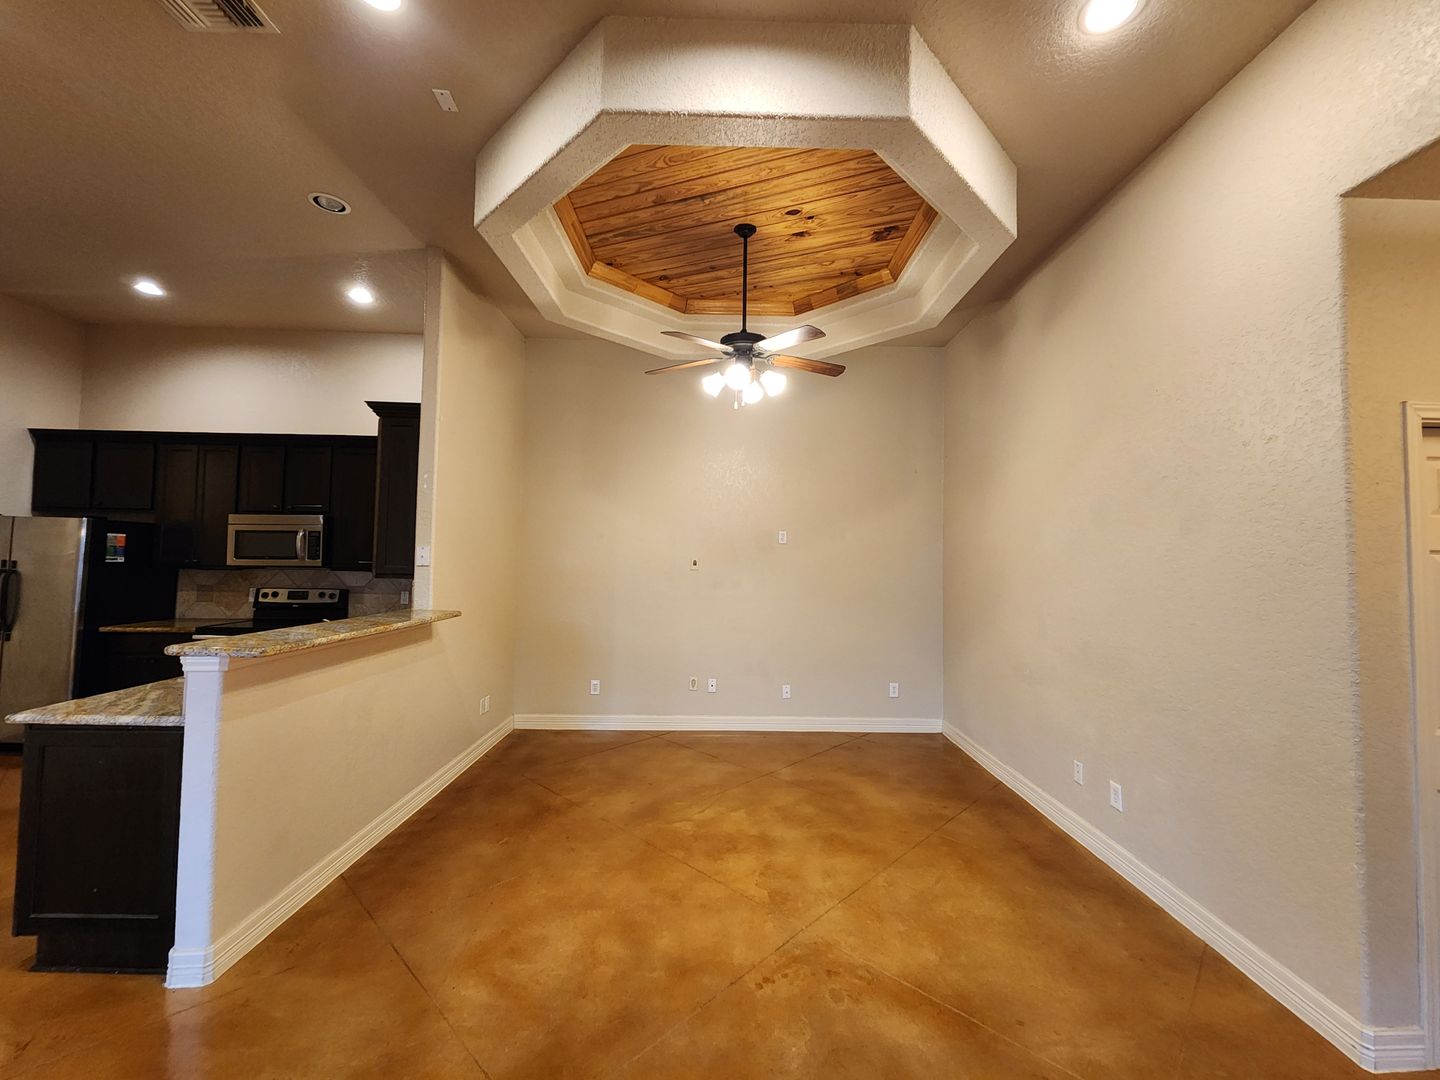 Stained Concrete Floors / Side by Side Fridge Included / Covered Patio / Fenced in Yard / CISD